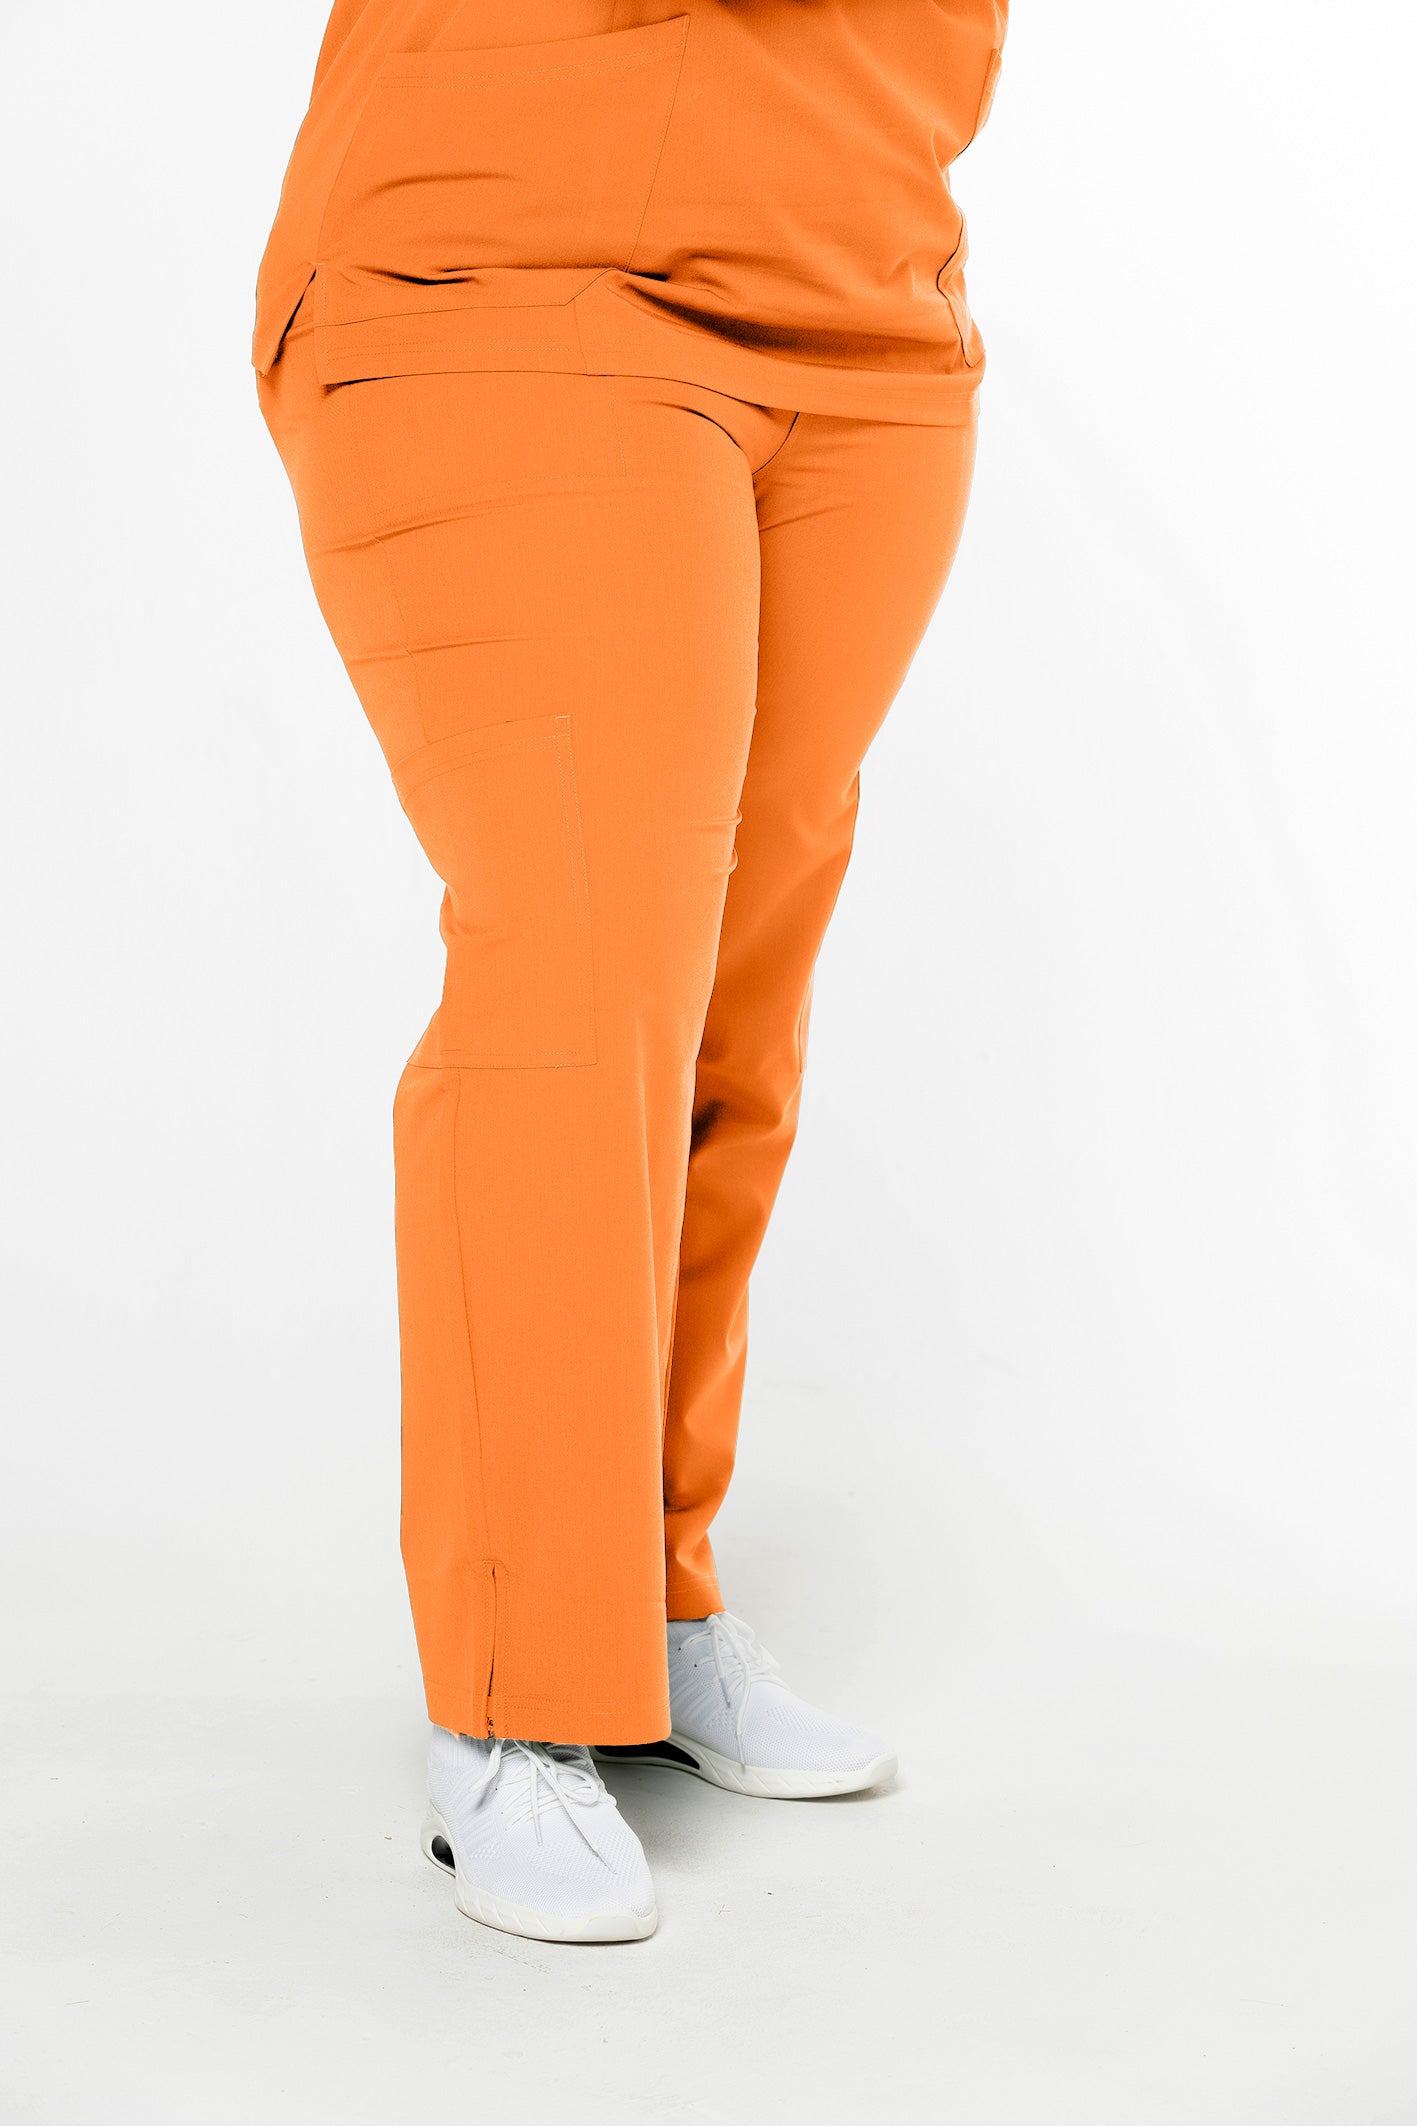 CSCRUBS CLASSIC COLLECTION STRAIGHT LEG PANT | CLASSIC WP1 (SIZE: PETITE & TALL)